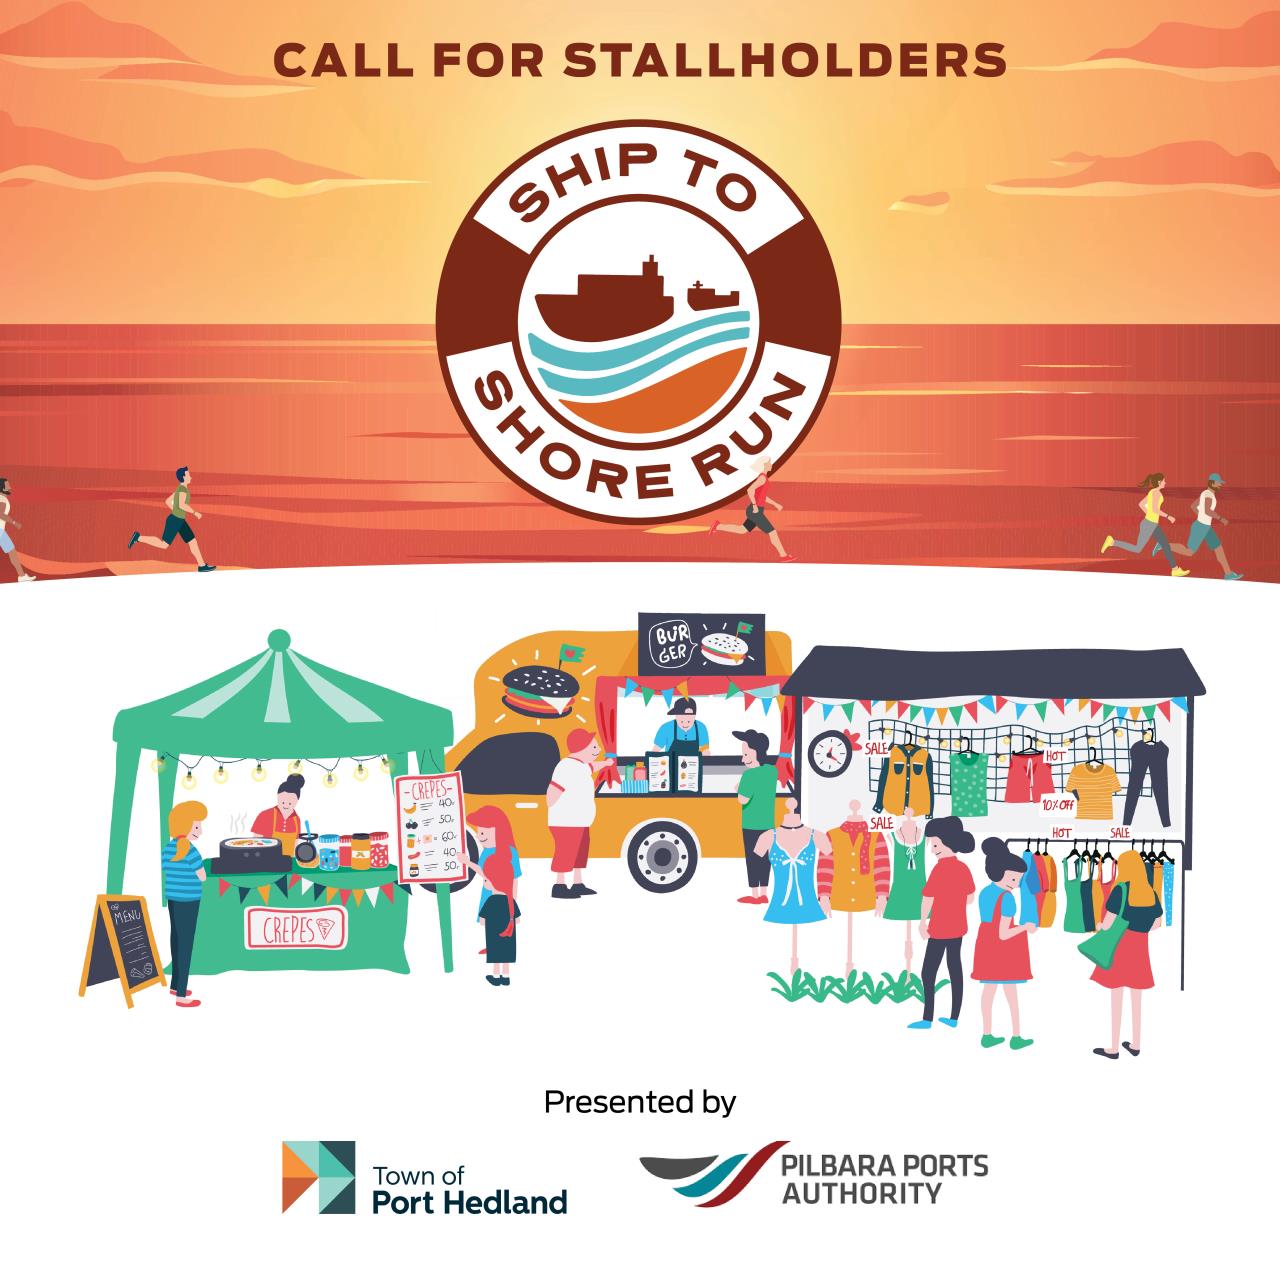 Applications now open for stallholders at the Ship to Shore Run Markets